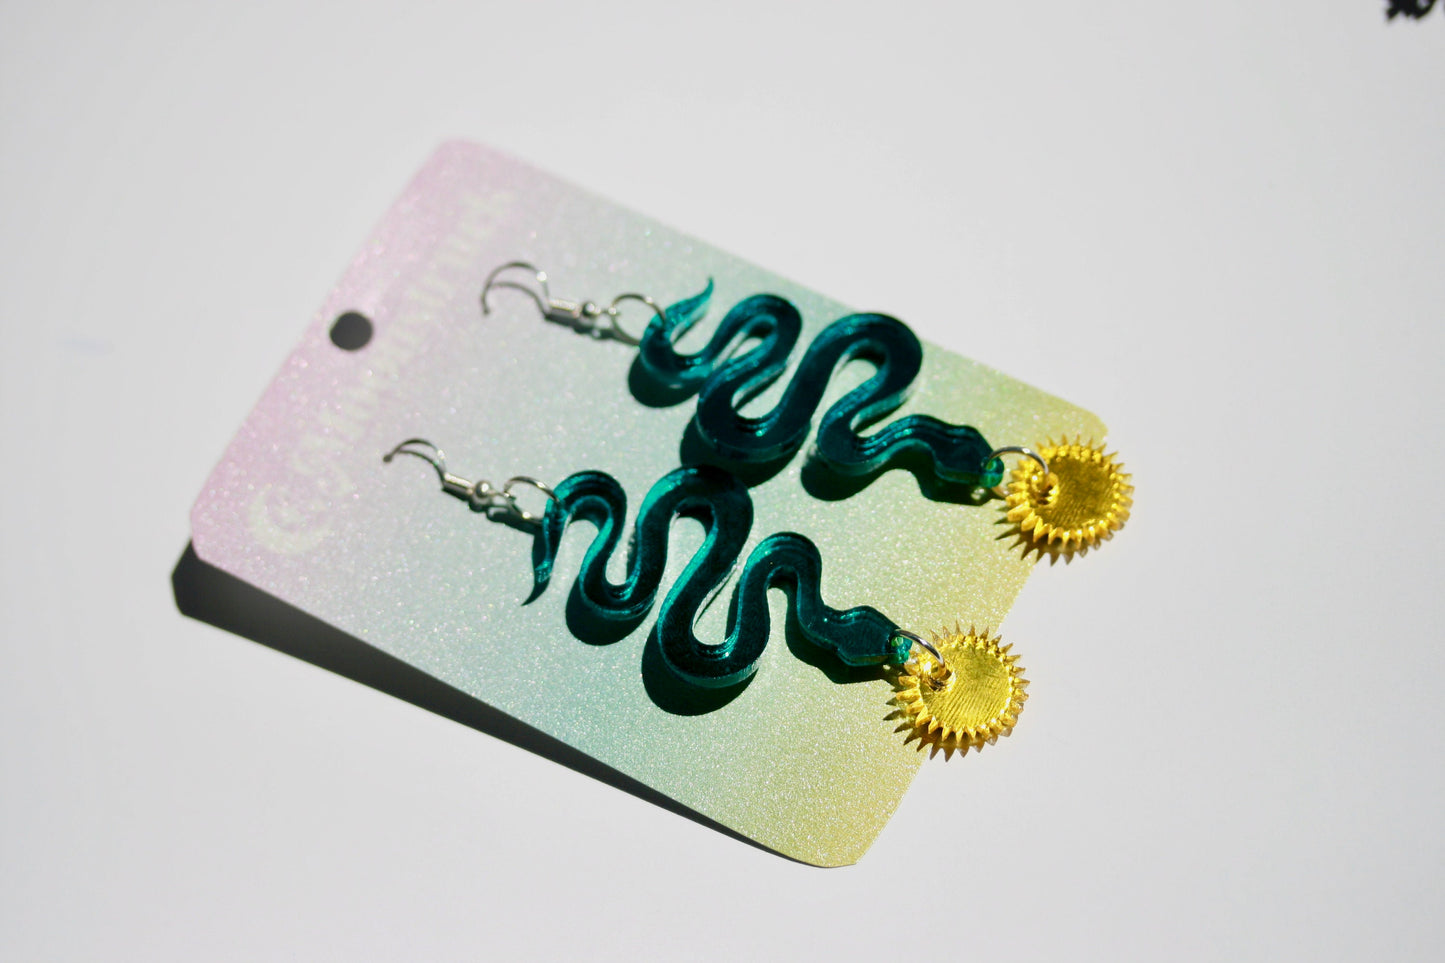 Snake Earrings - Reflective Pink Teal Green Yellow Star Sunburst Tropical Witchy Goth Seapunk Serpent Reptile Festival Rave Sterling Silver